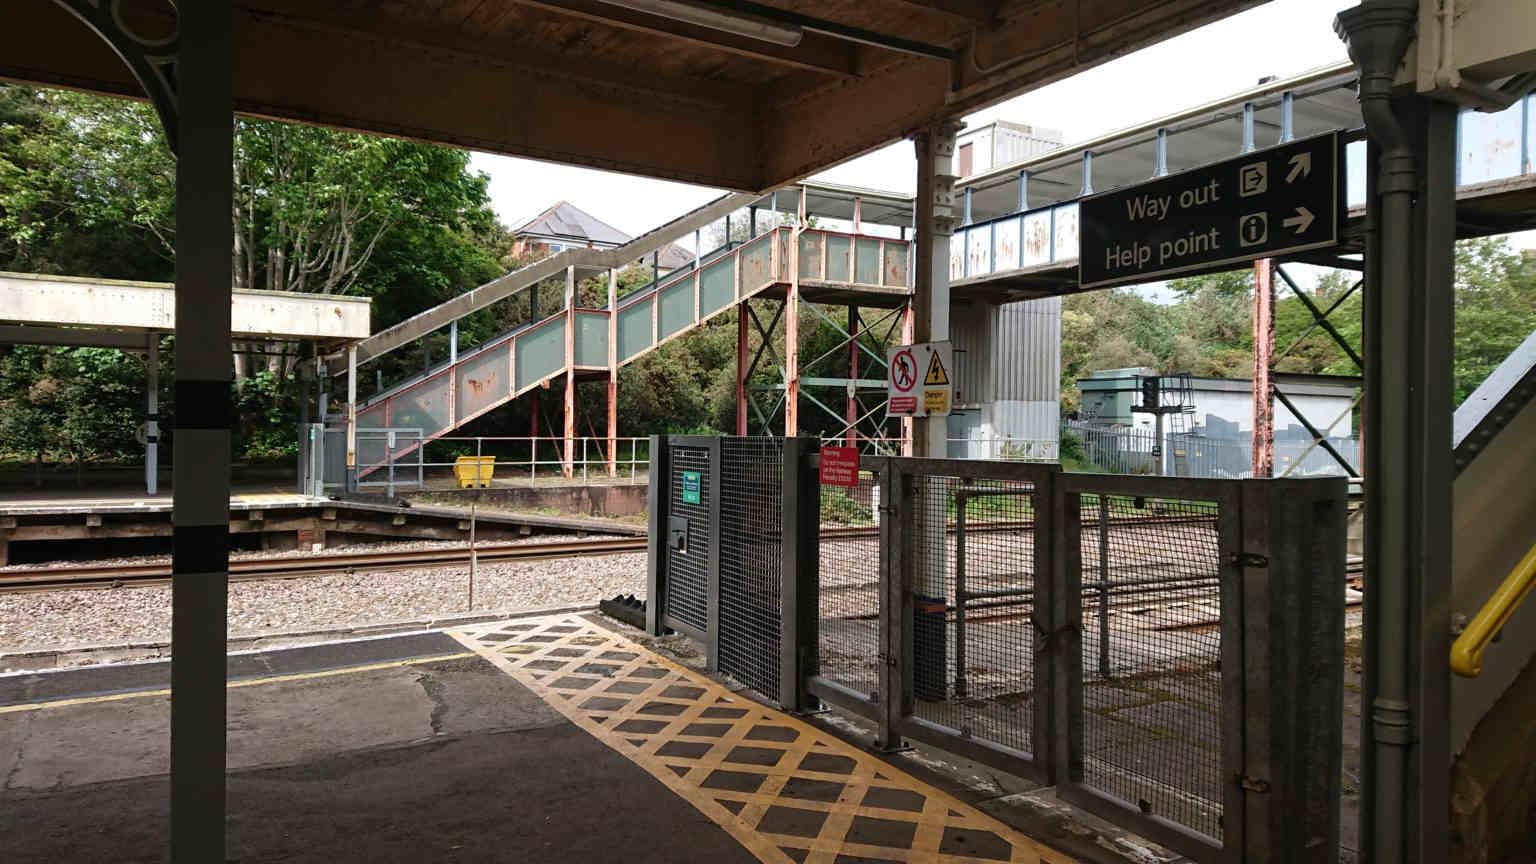 colour photo of modern day steps up from Pokesdown Station platform to the footbridge